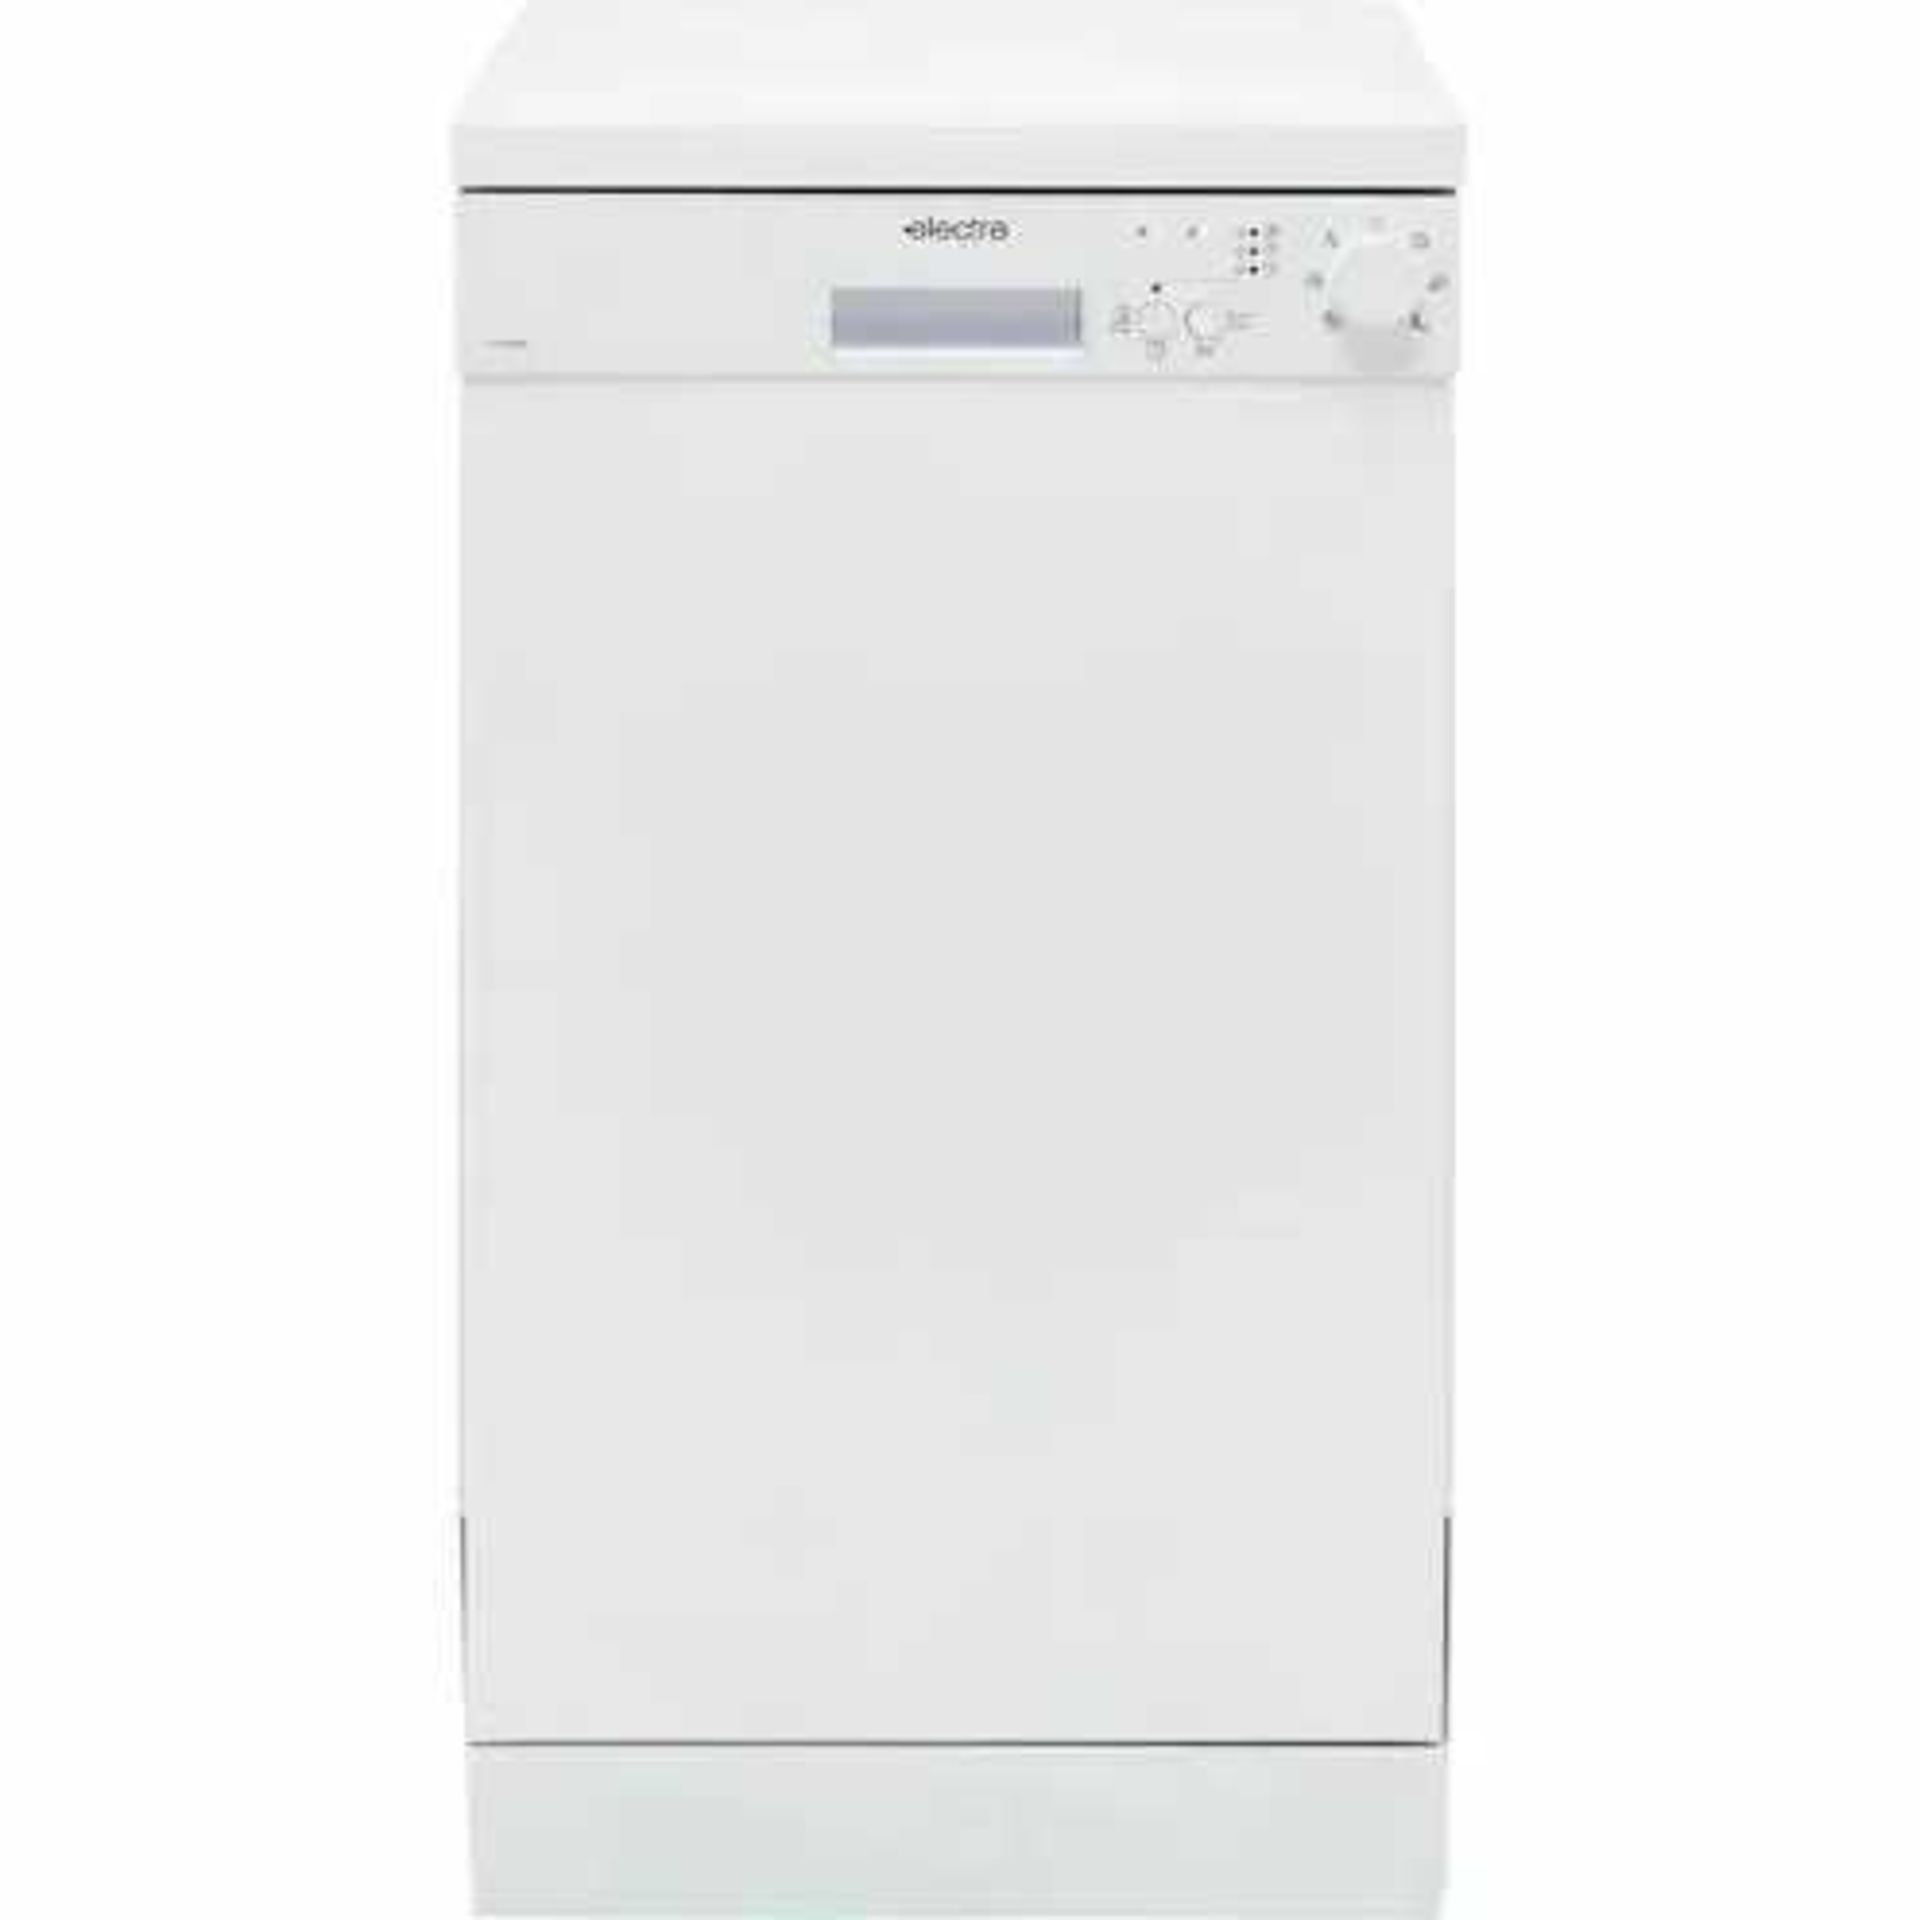 RRP £350 Electra White Fully Integrated Dishwasher